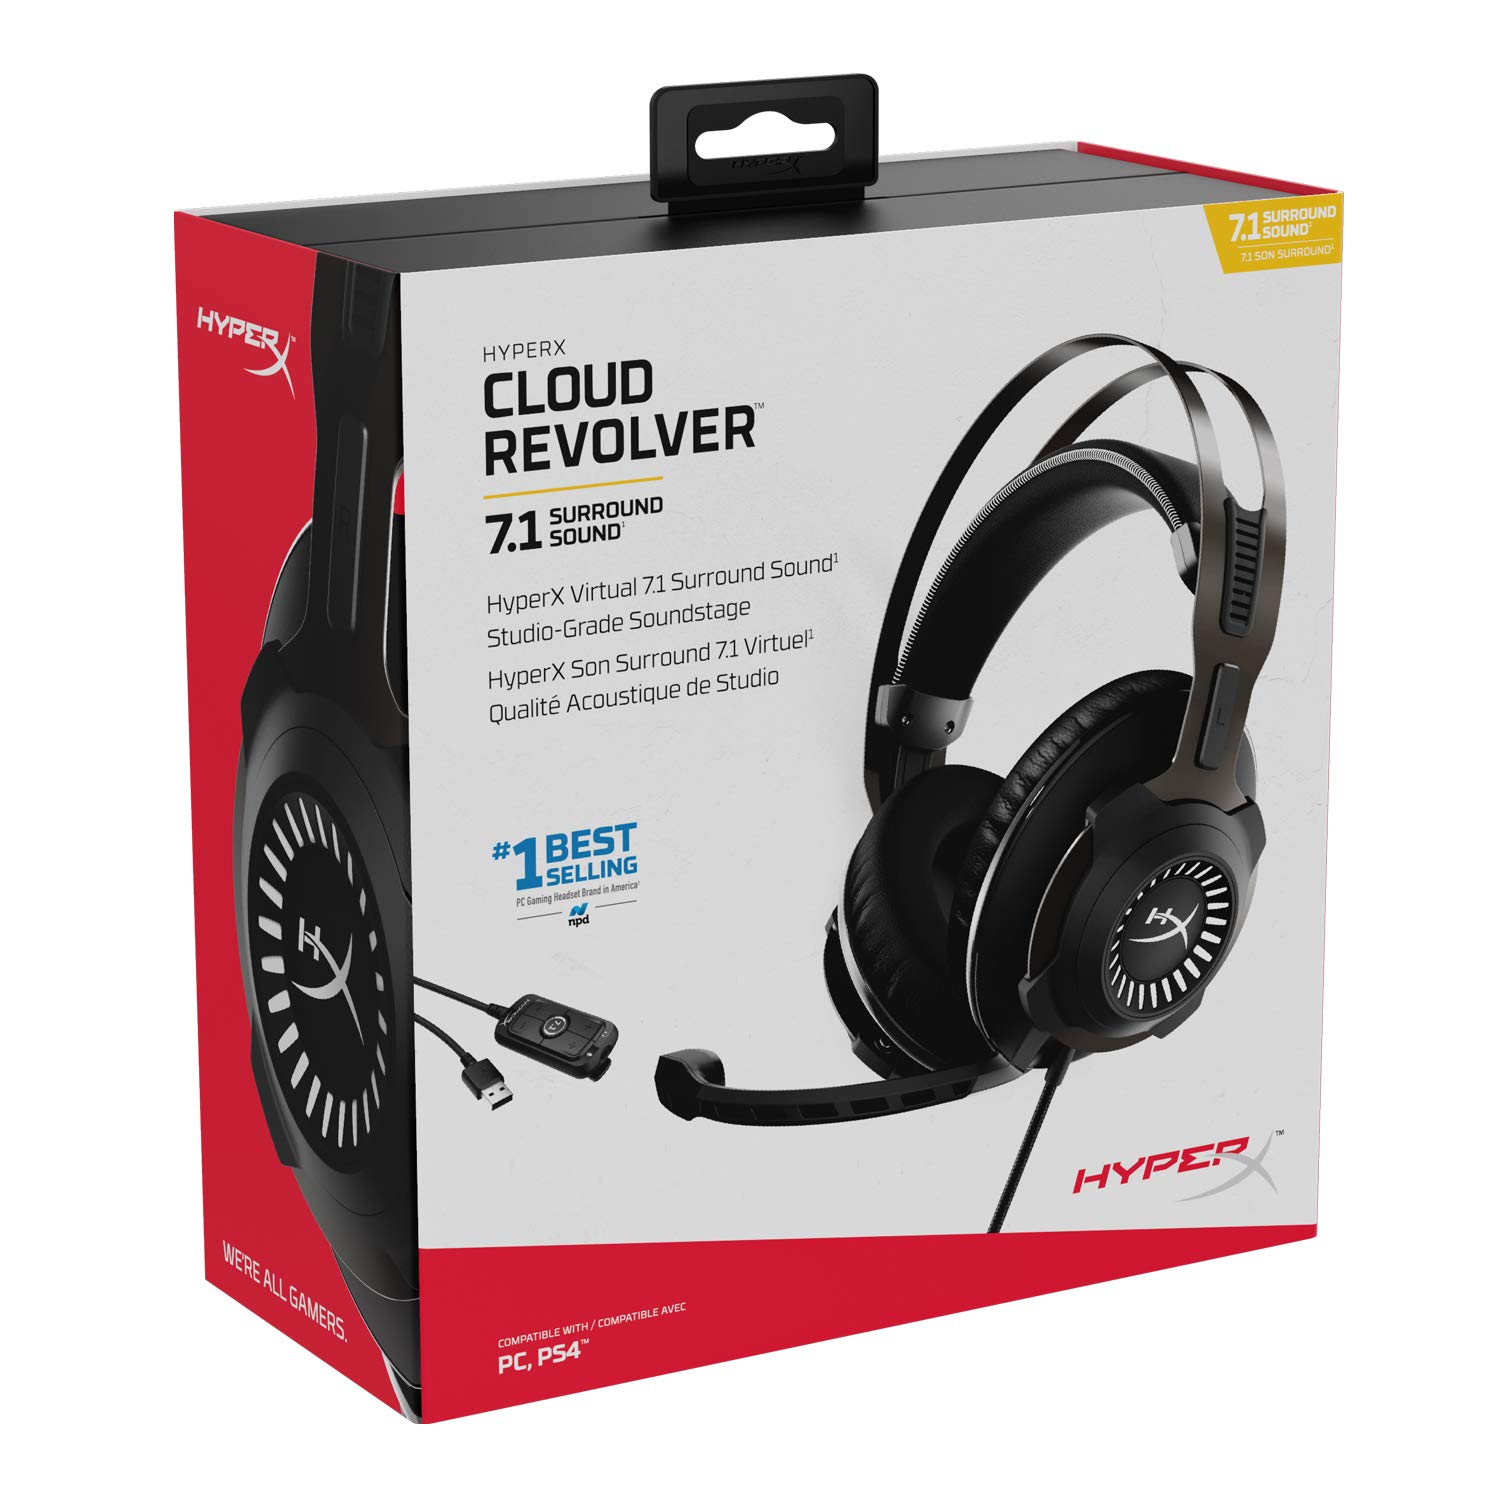 HyperX Cloud Revolver - Gaming Headset with HyperX 7.1 Surround Sound, Signature Memory Foam, Premium Leatherette, Steel Frame, Detachable Noise-Cancellation Microphone $77